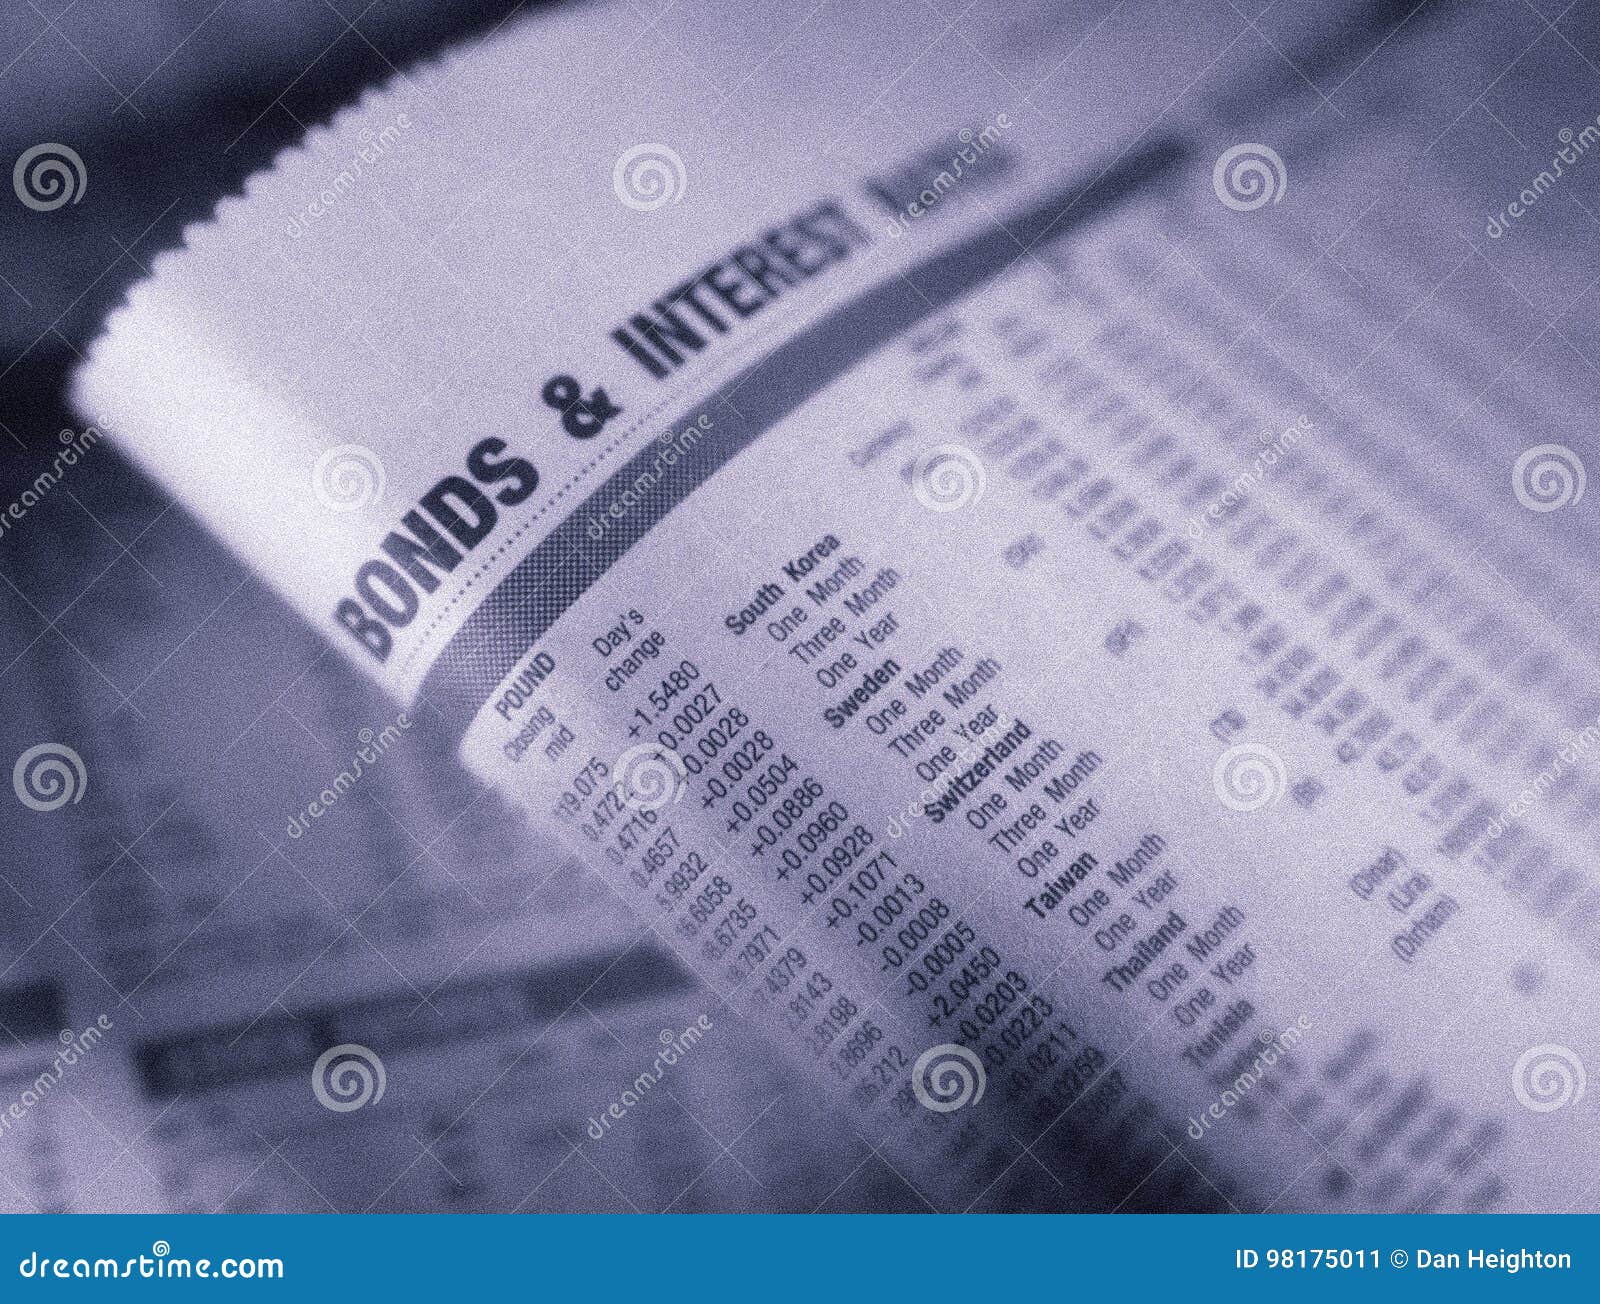 financial page showing bonds and interest rates